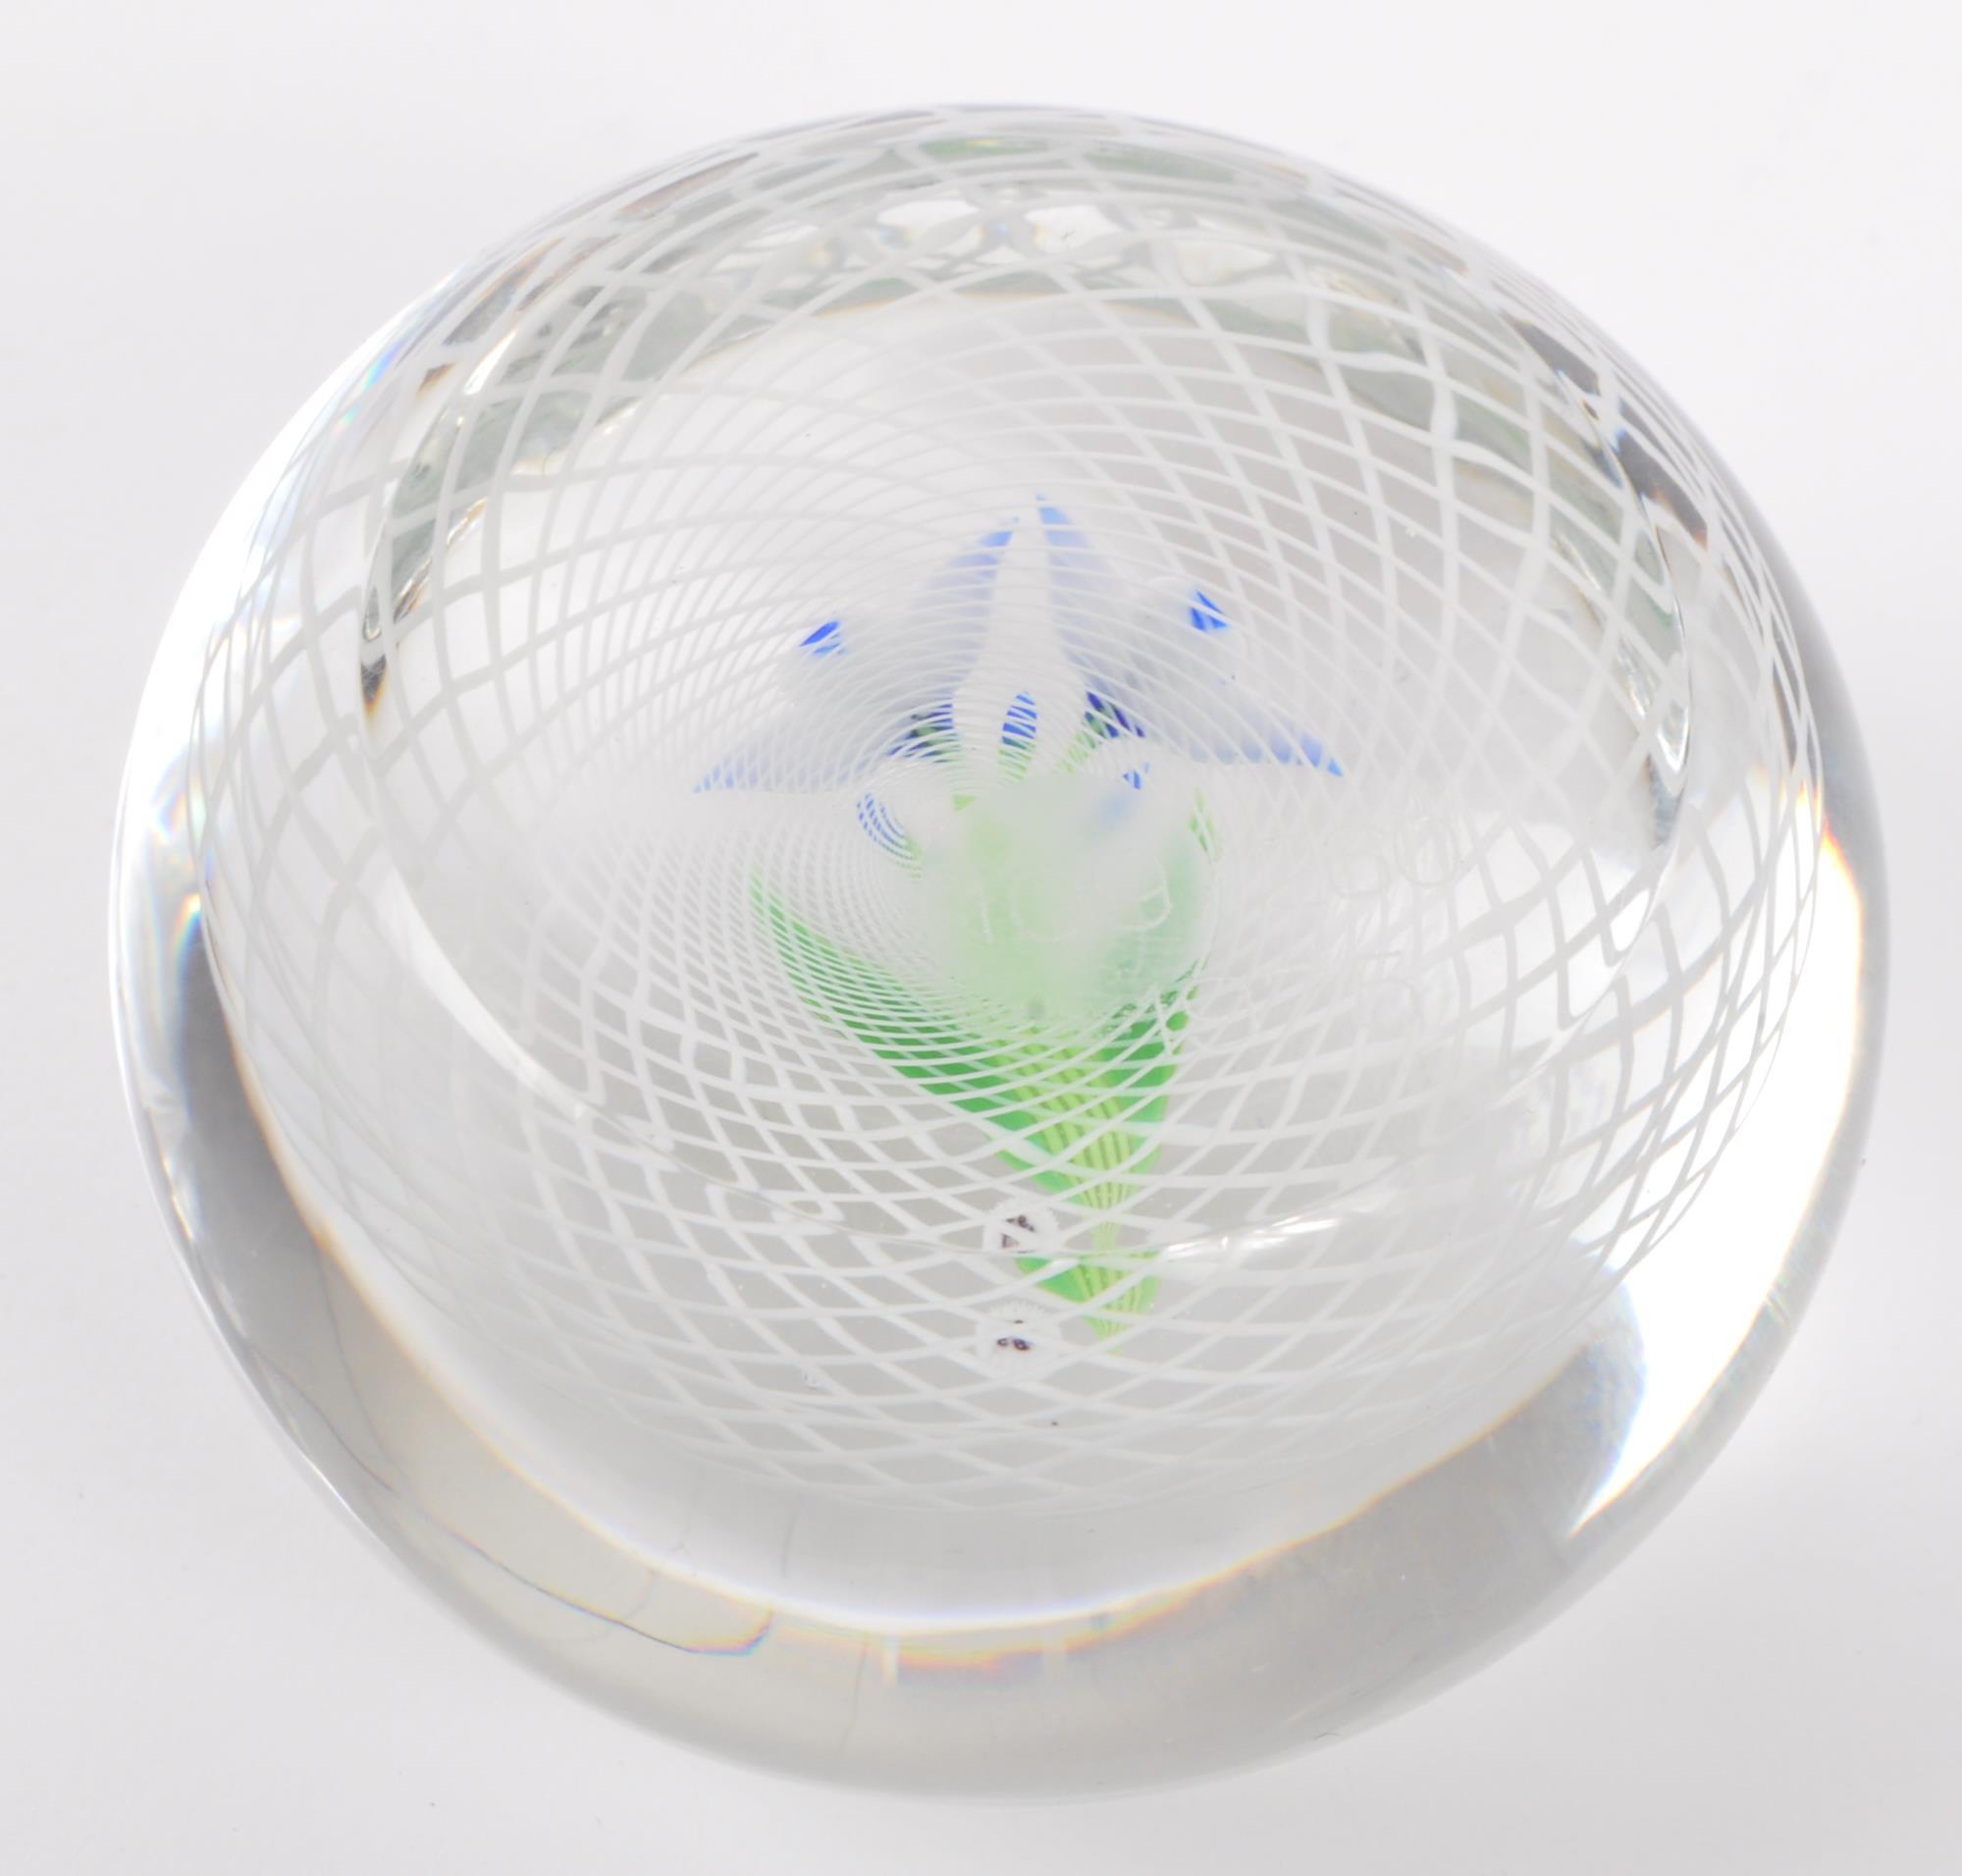 1975 BACCARAT FRENCH GLASS LAMPWORK PAPERWEIGHT - Image 5 of 5